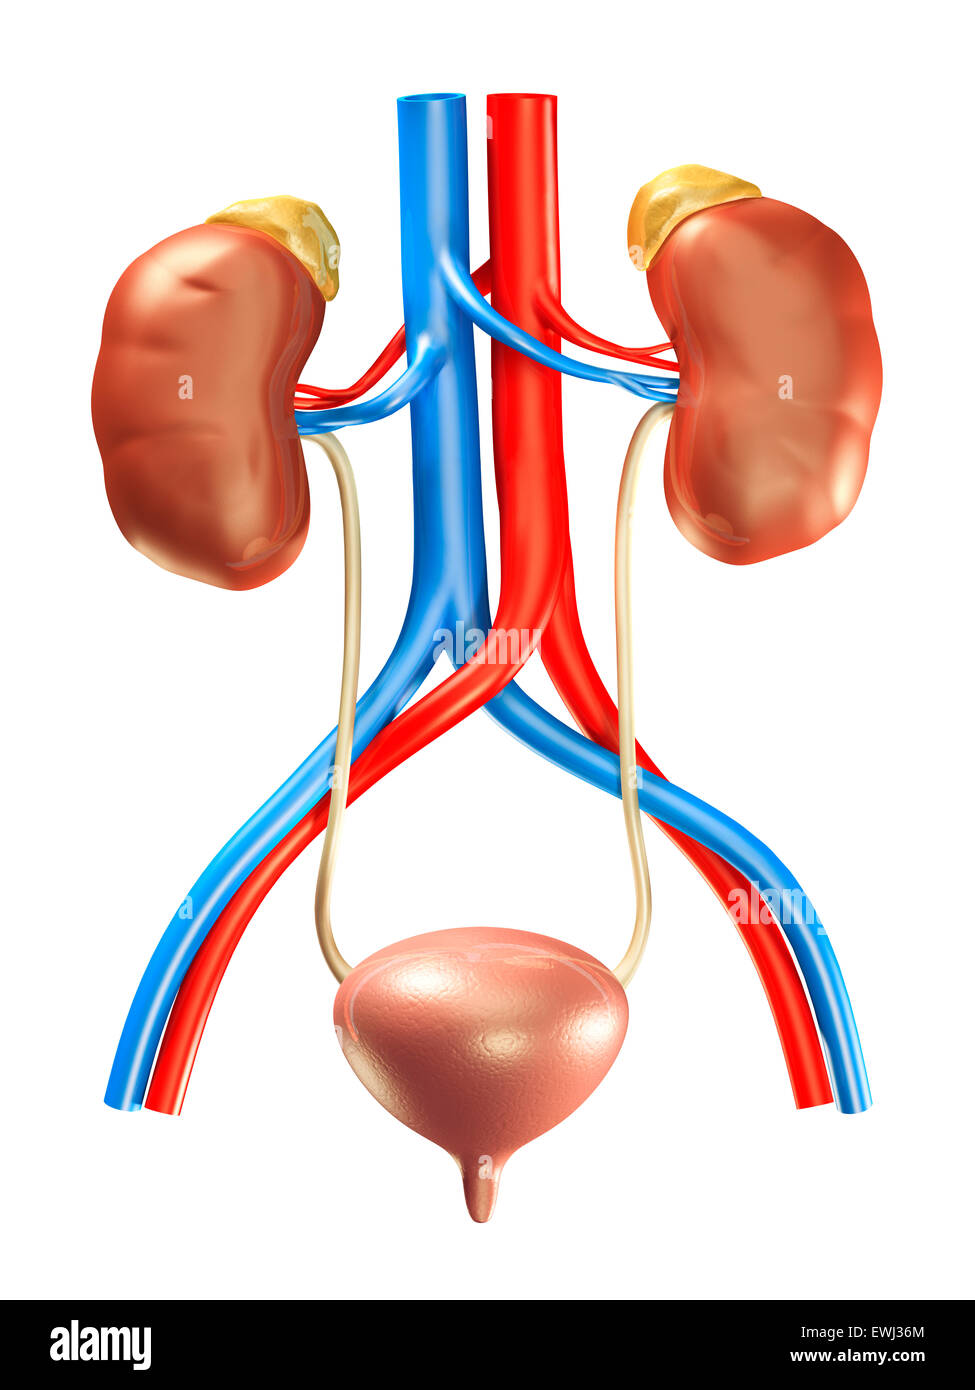 Human kidneys, adrenal glands, a bladder and arteries, medical 3D illustration isolated on white background Stock Photo